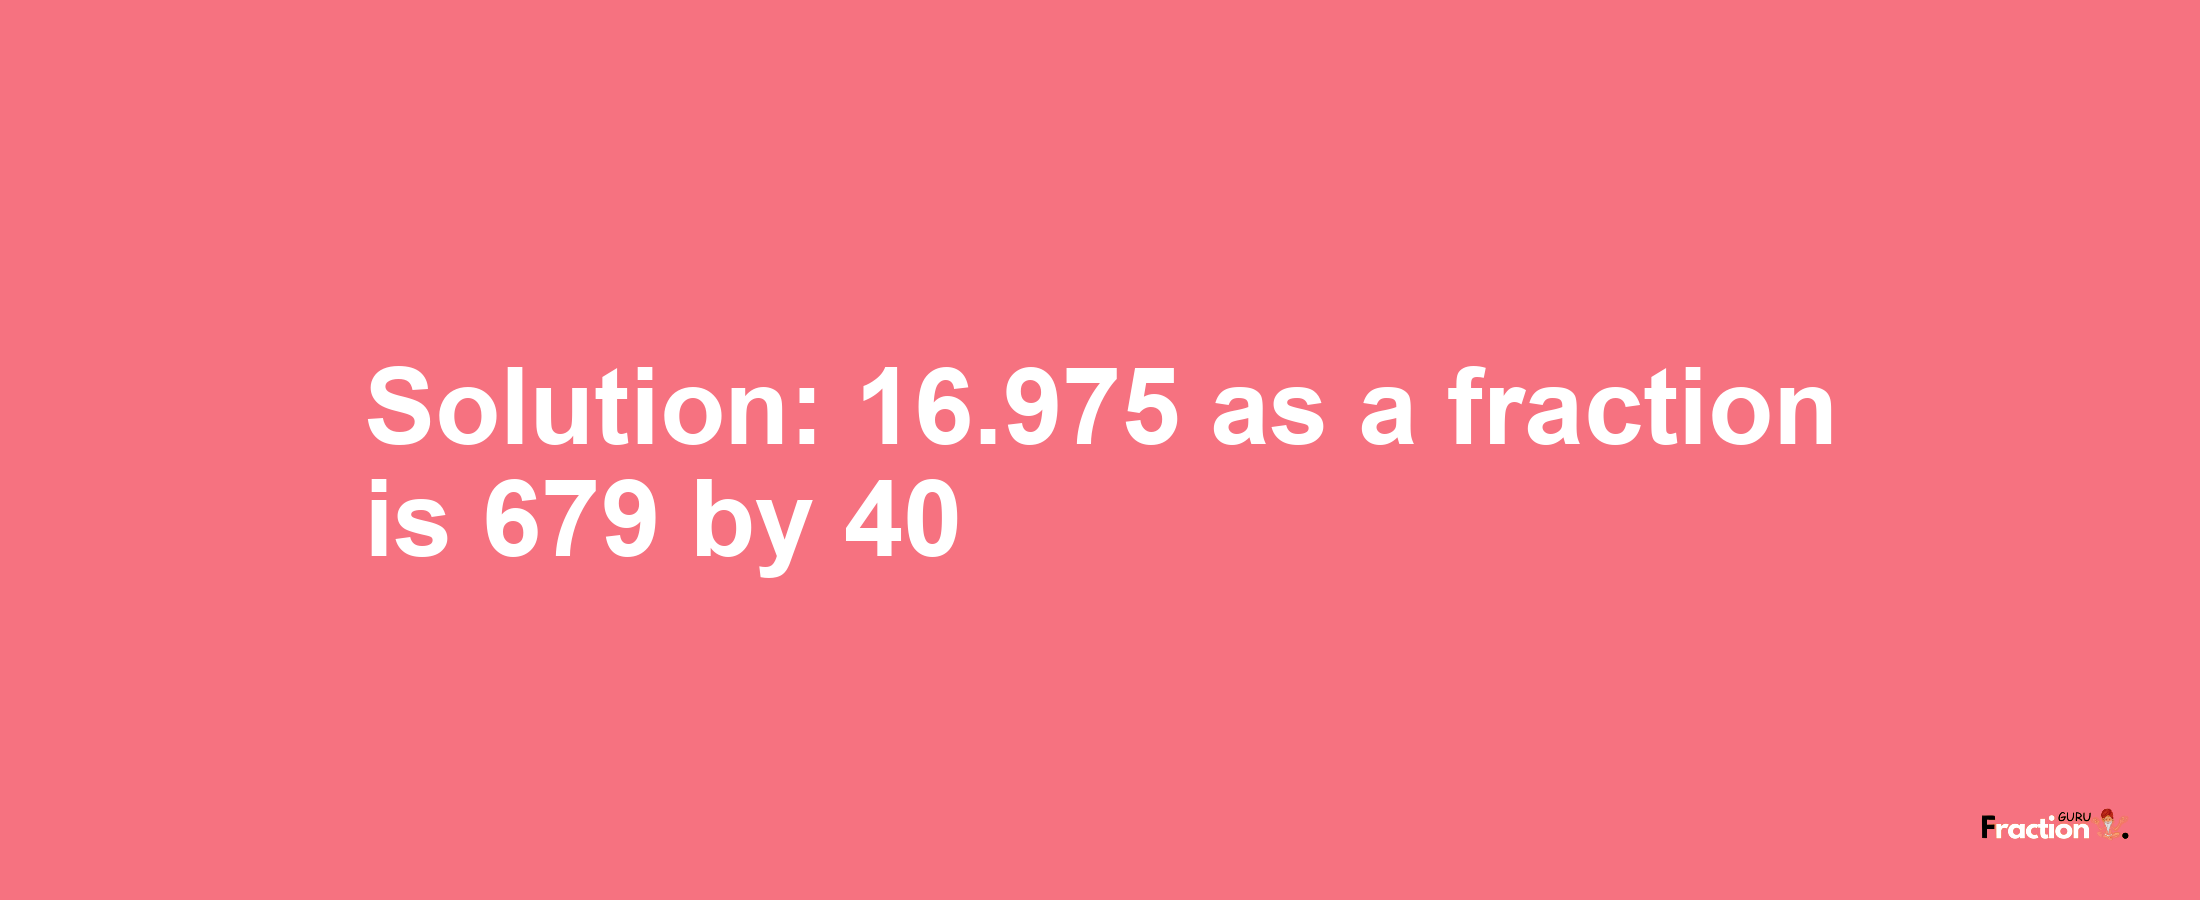 Solution:16.975 as a fraction is 679/40